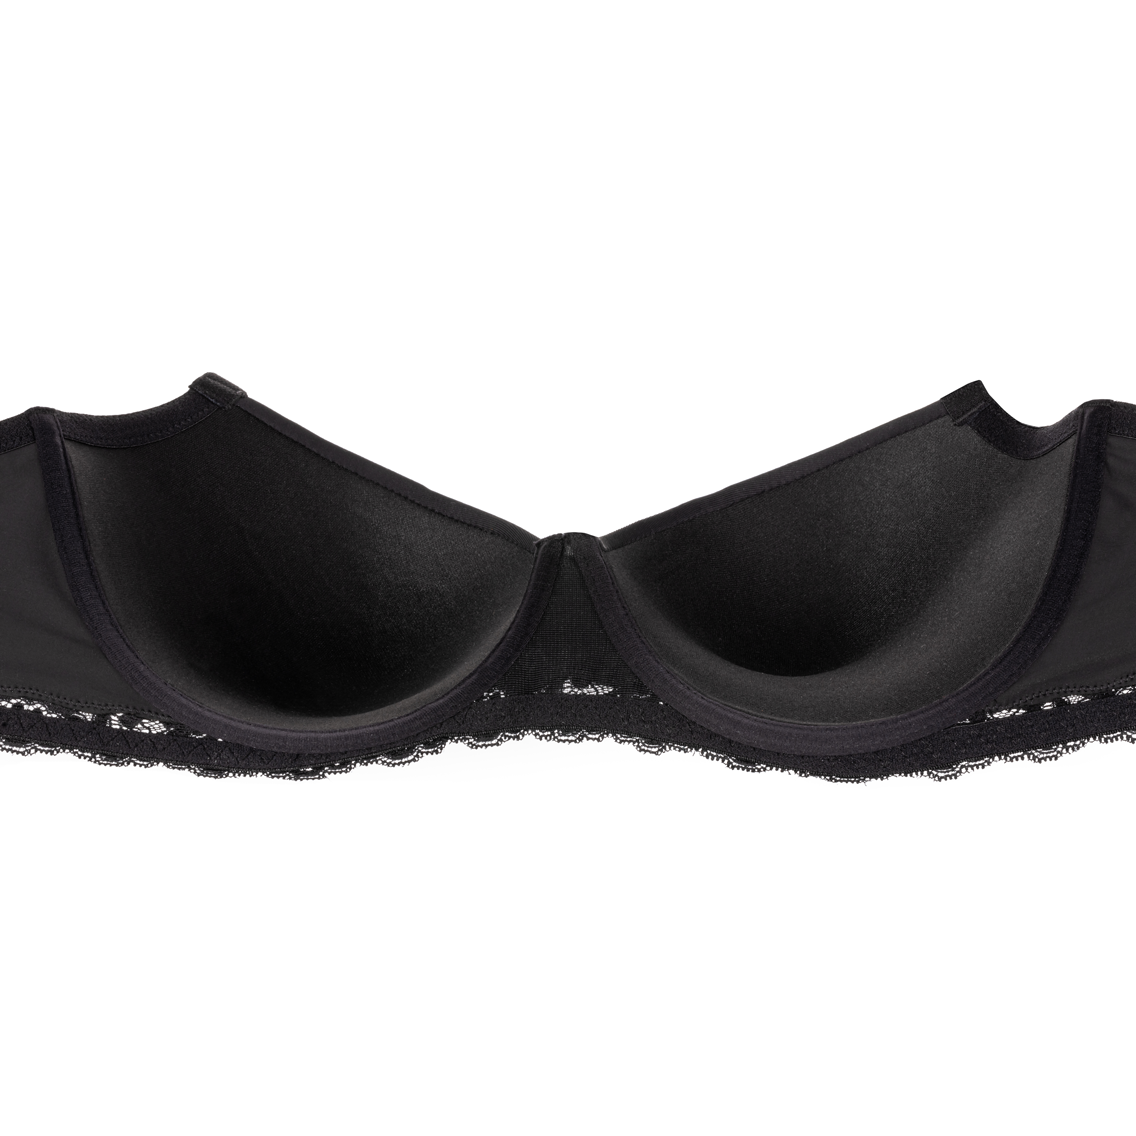 The Best Bra for Asymmetrical Breasts